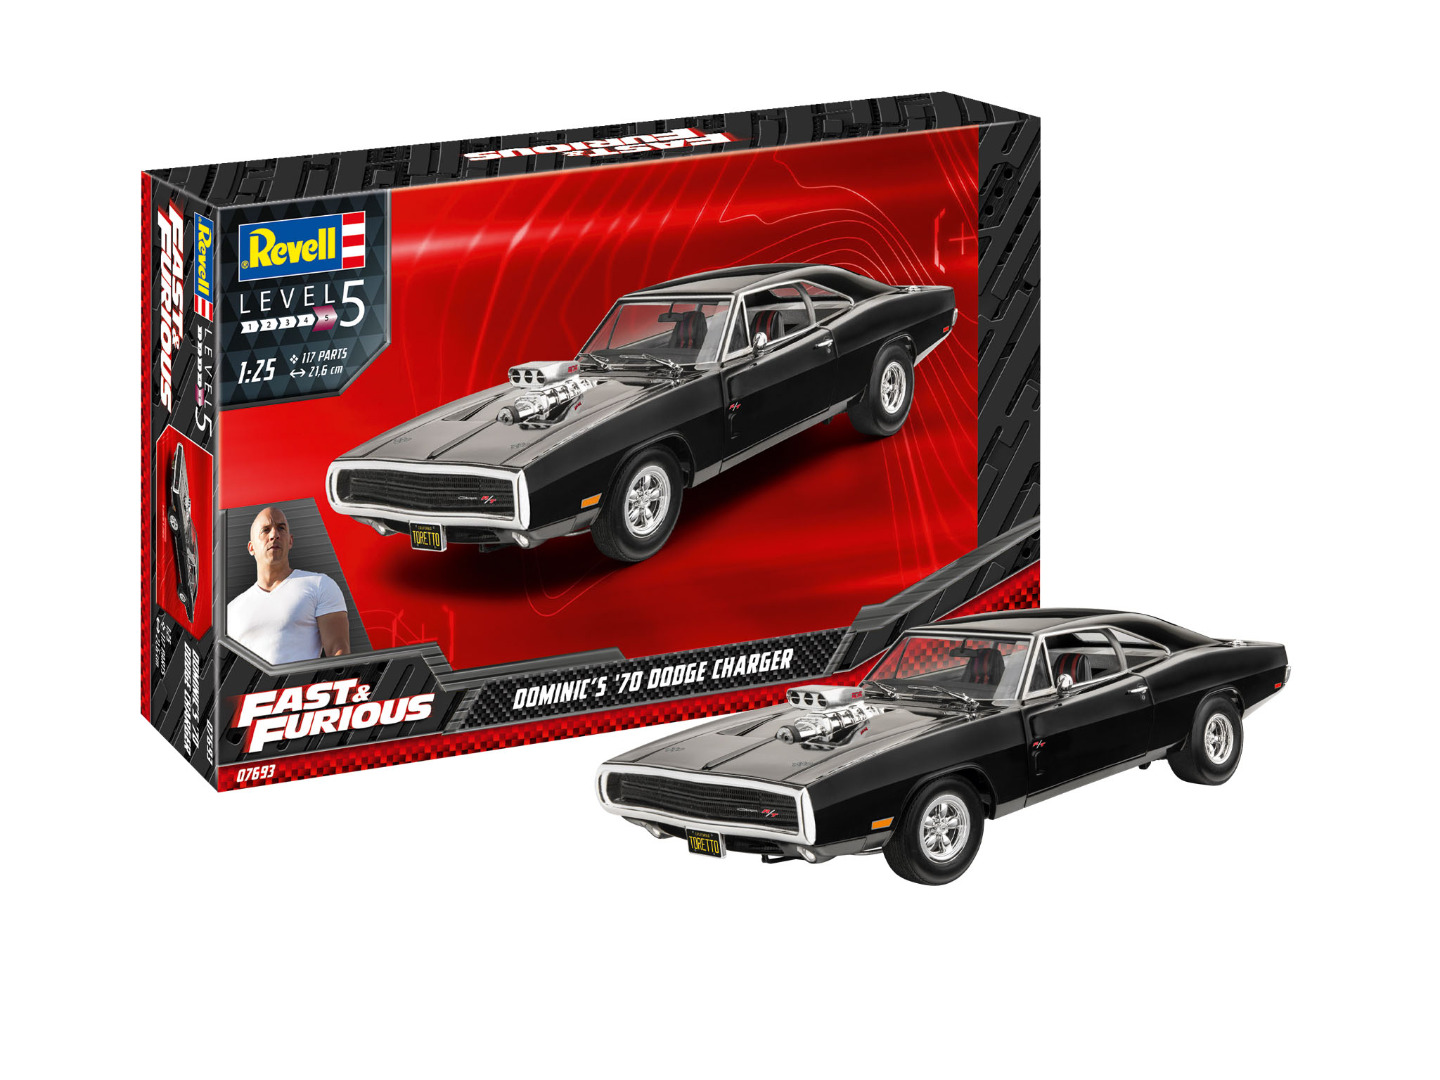 Revell Model Kit Fast & Furious - Dominics 1970 Dodge Charger 1:25